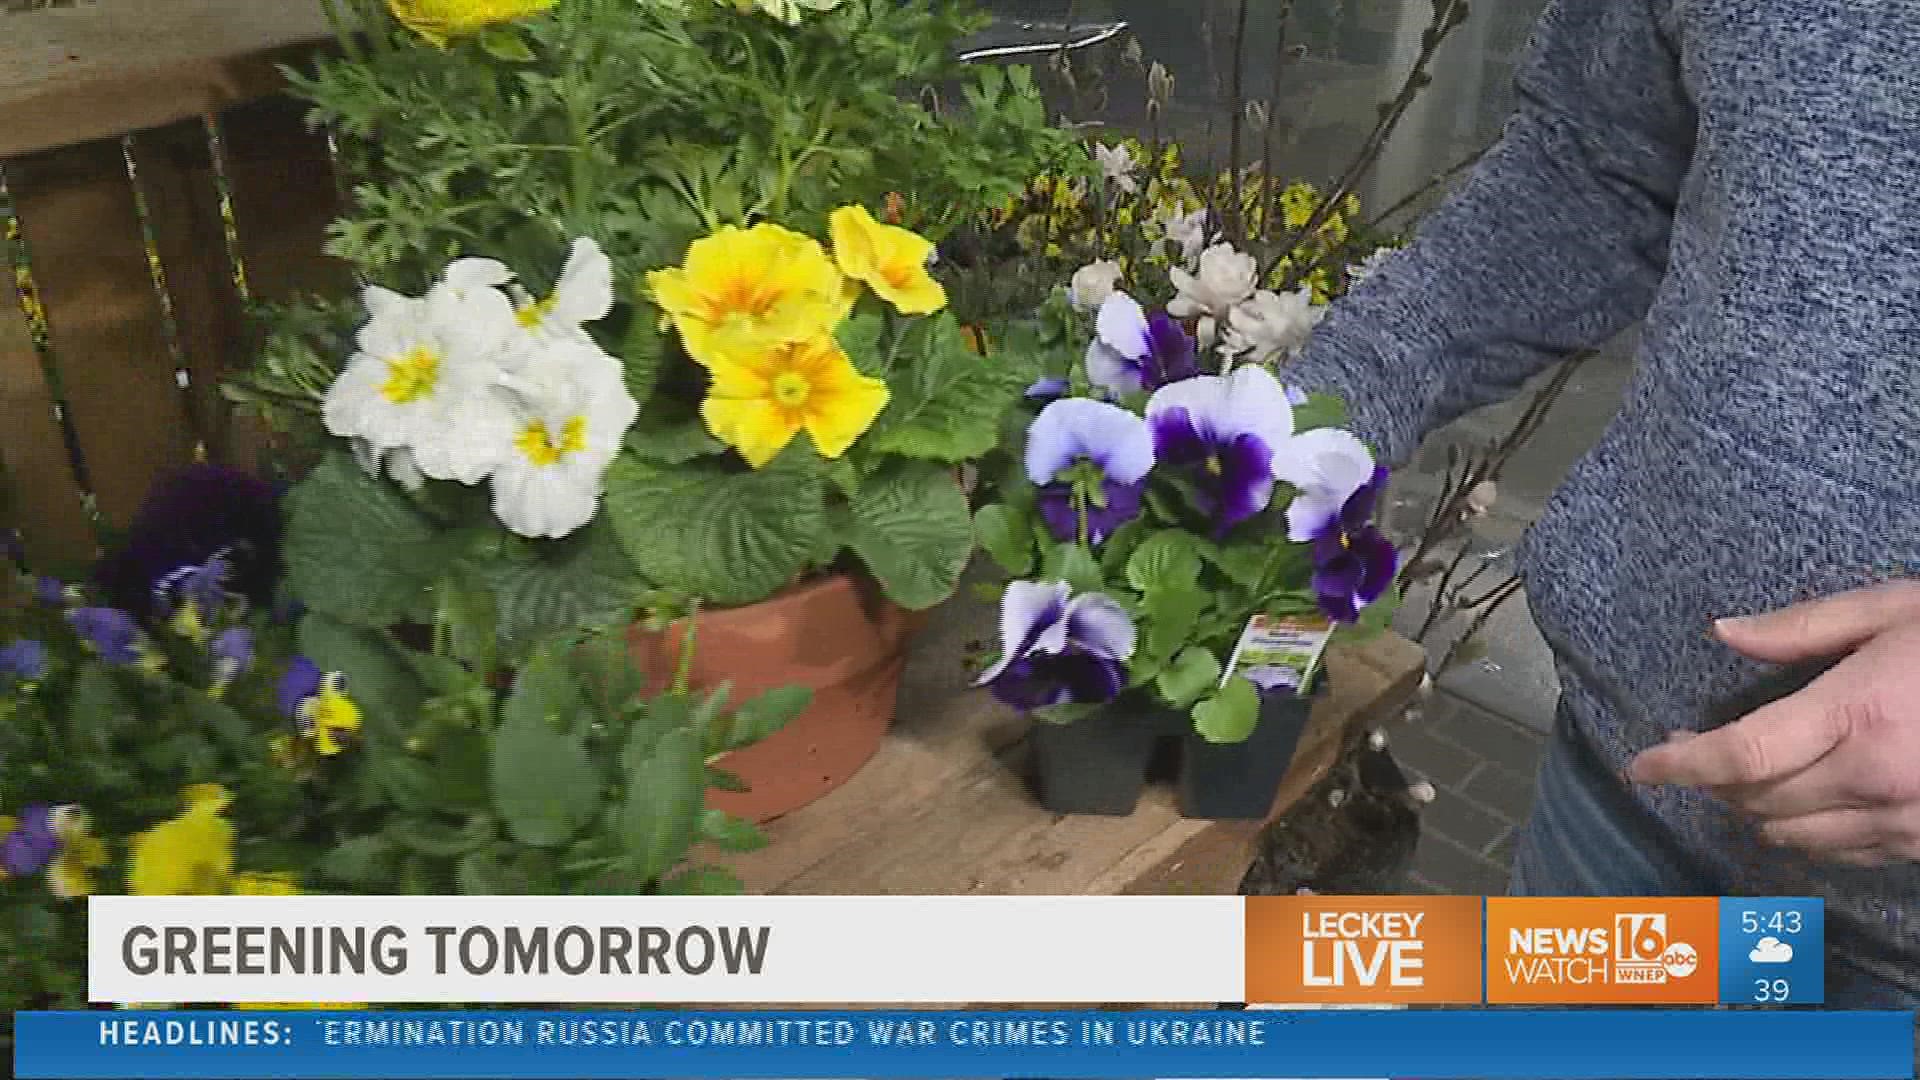 Looking to tidy up outside of your home? What are the dos & don’ts this time of year in March? Newswatch 16’s Ryan Leckey teamed up with some plant pros for answers.